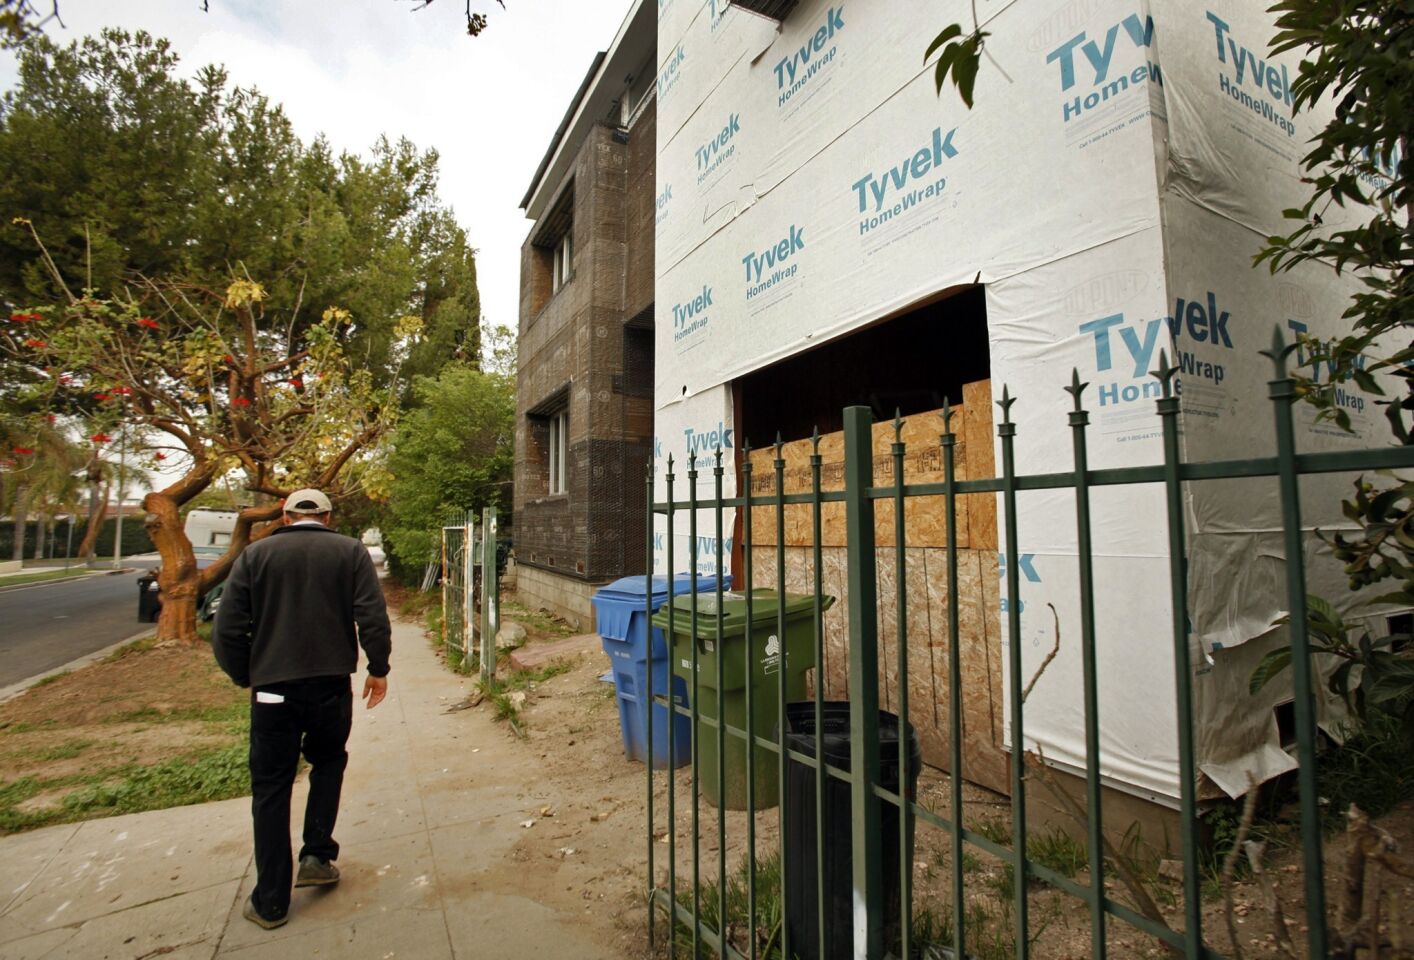 Bill Cohen walks past a large home under construction in his neighborhood near the Westside. Some believe the "mansionization" trend is being fueled by loopholes in L.A.'s building codes.